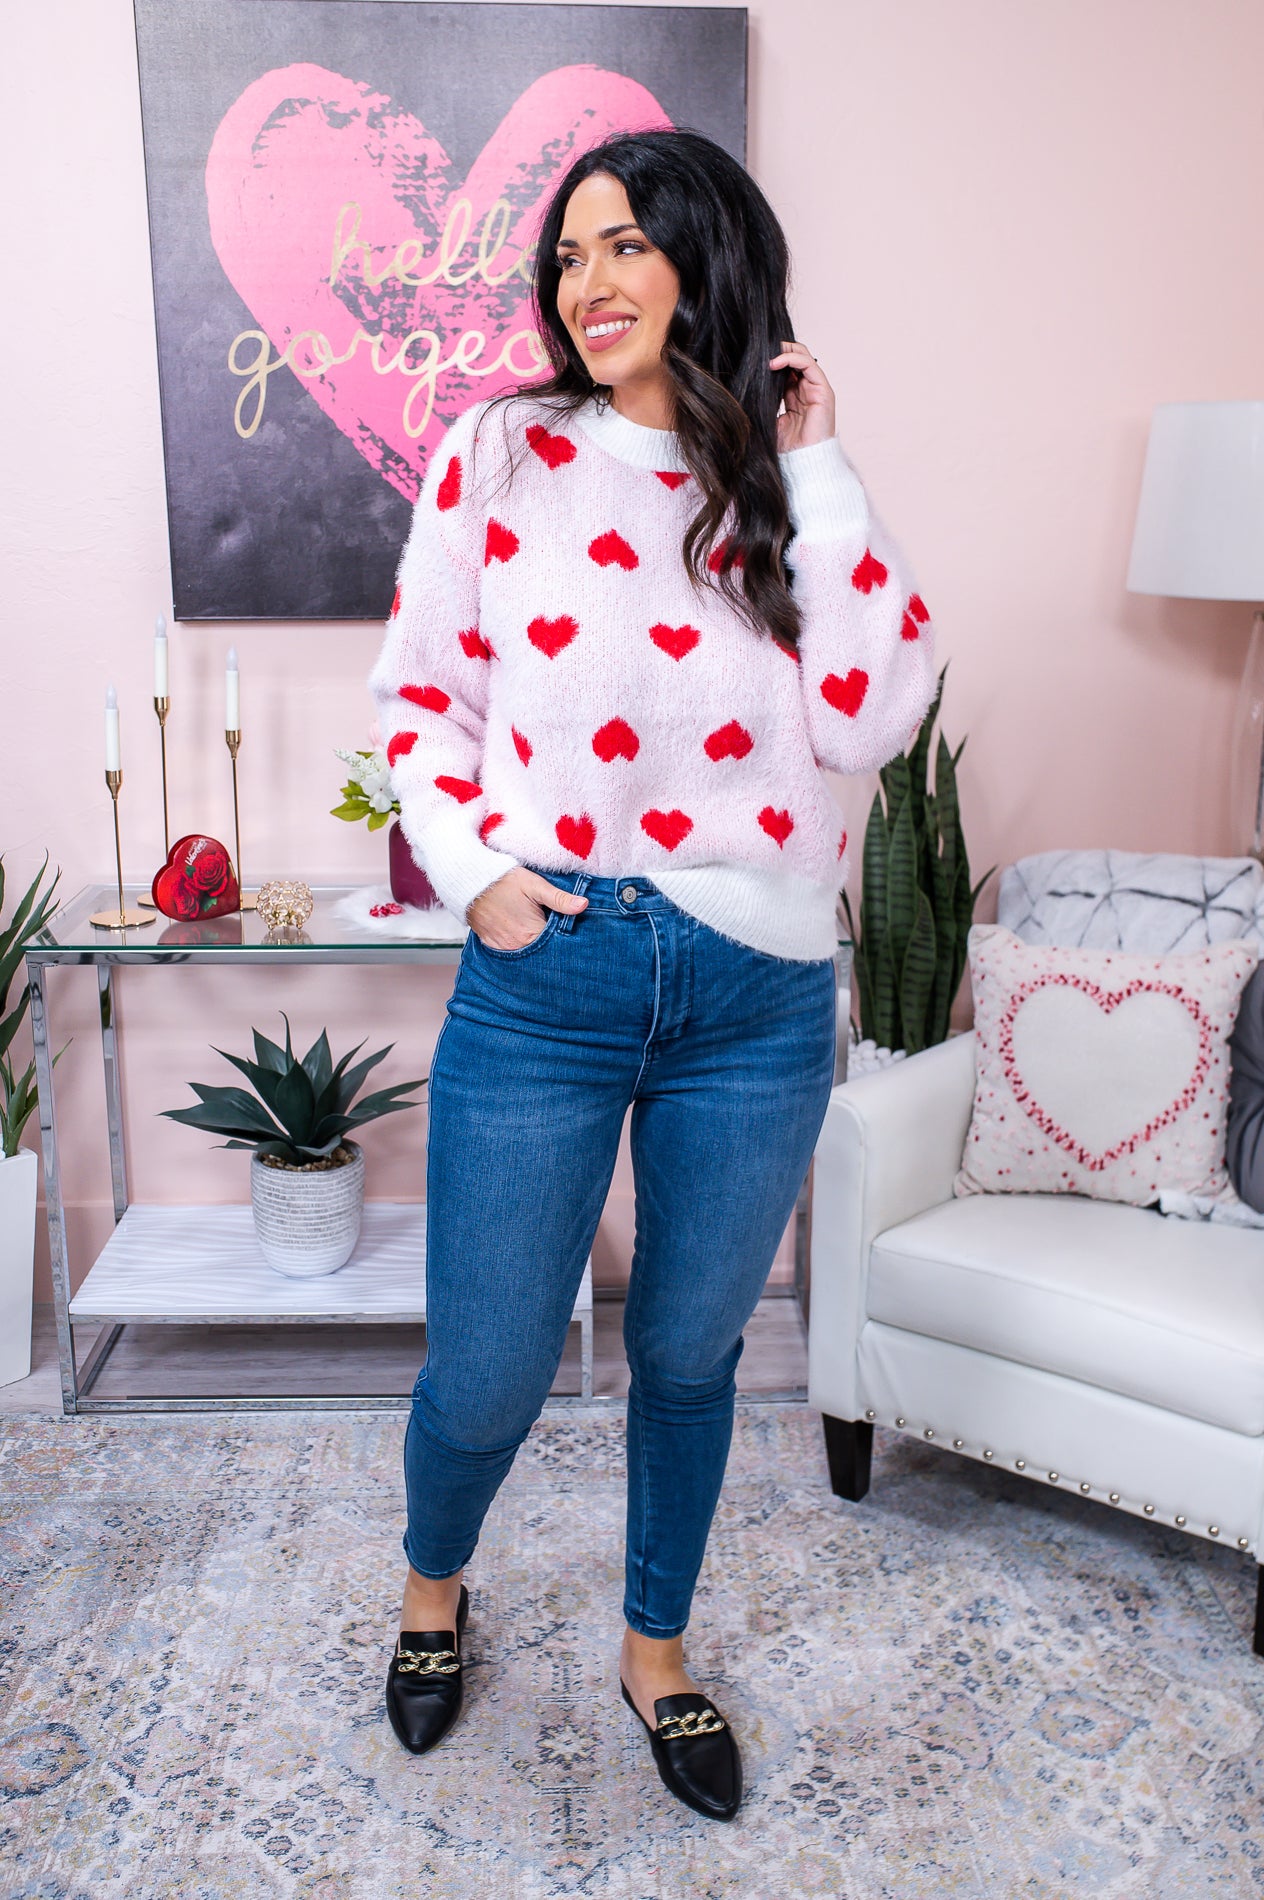 Key To My Heart Off White/Red Heart Printed Sweater Top - T6159OW